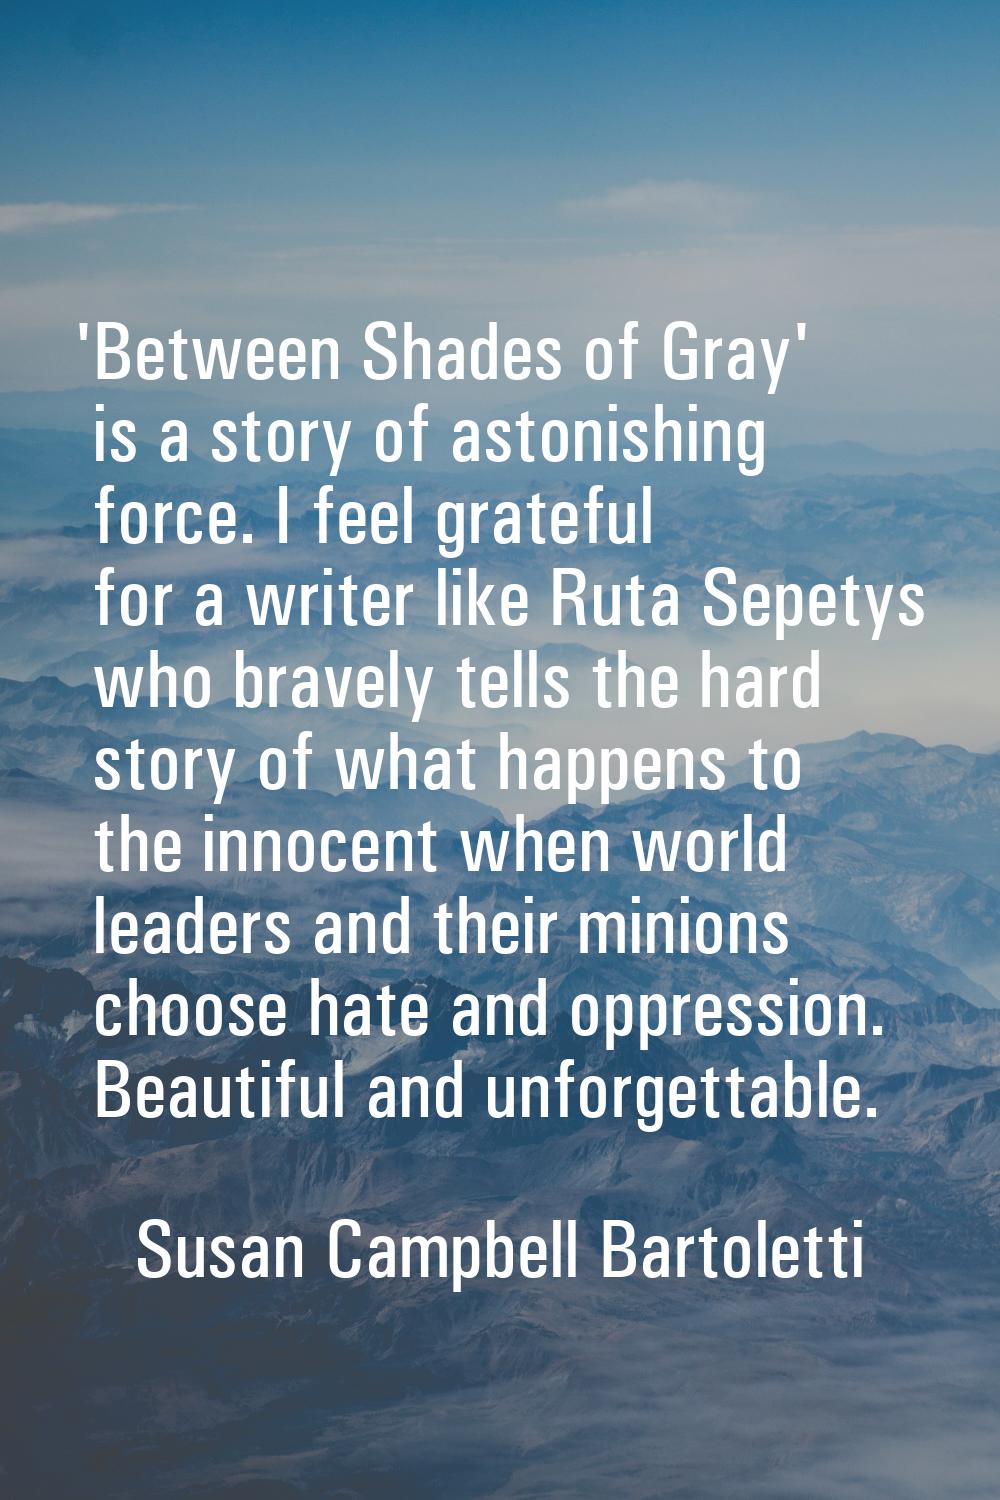 'Between Shades of Gray' is a story of astonishing force. I feel grateful for a writer like Ruta Se